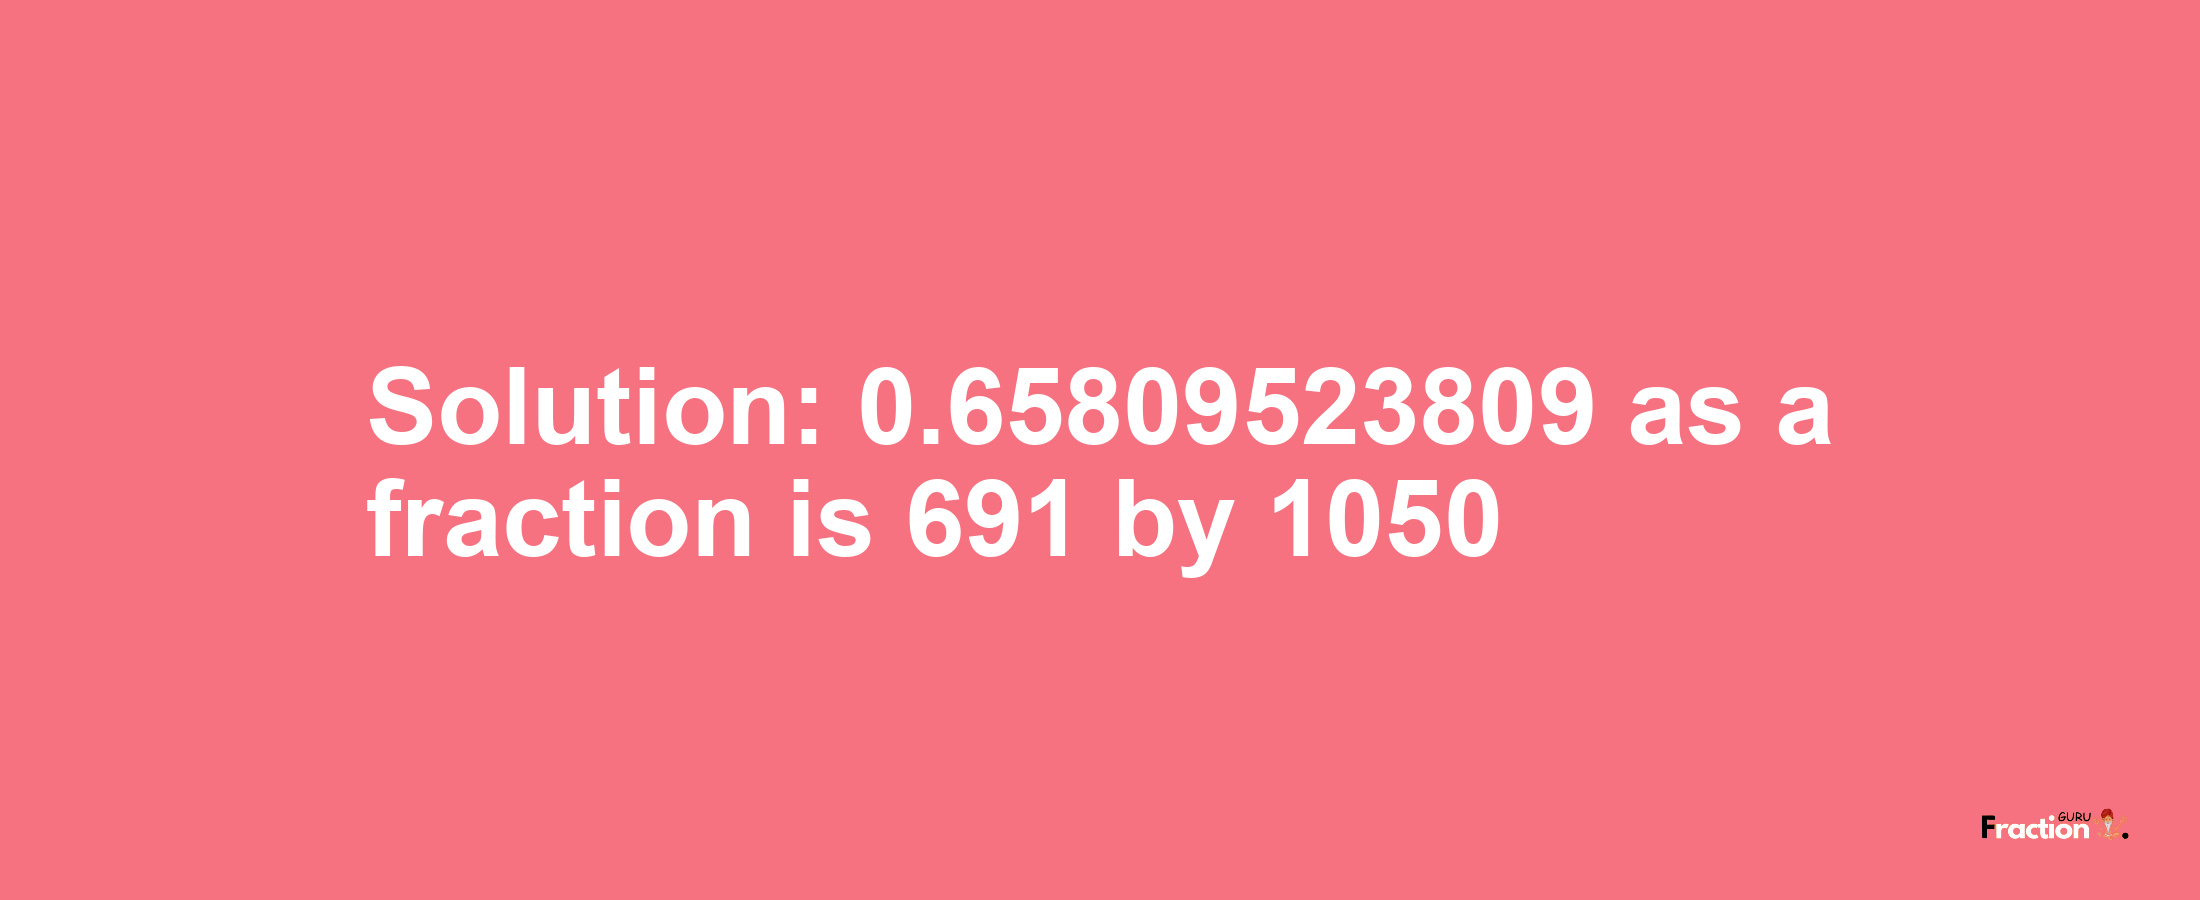 Solution:0.65809523809 as a fraction is 691/1050